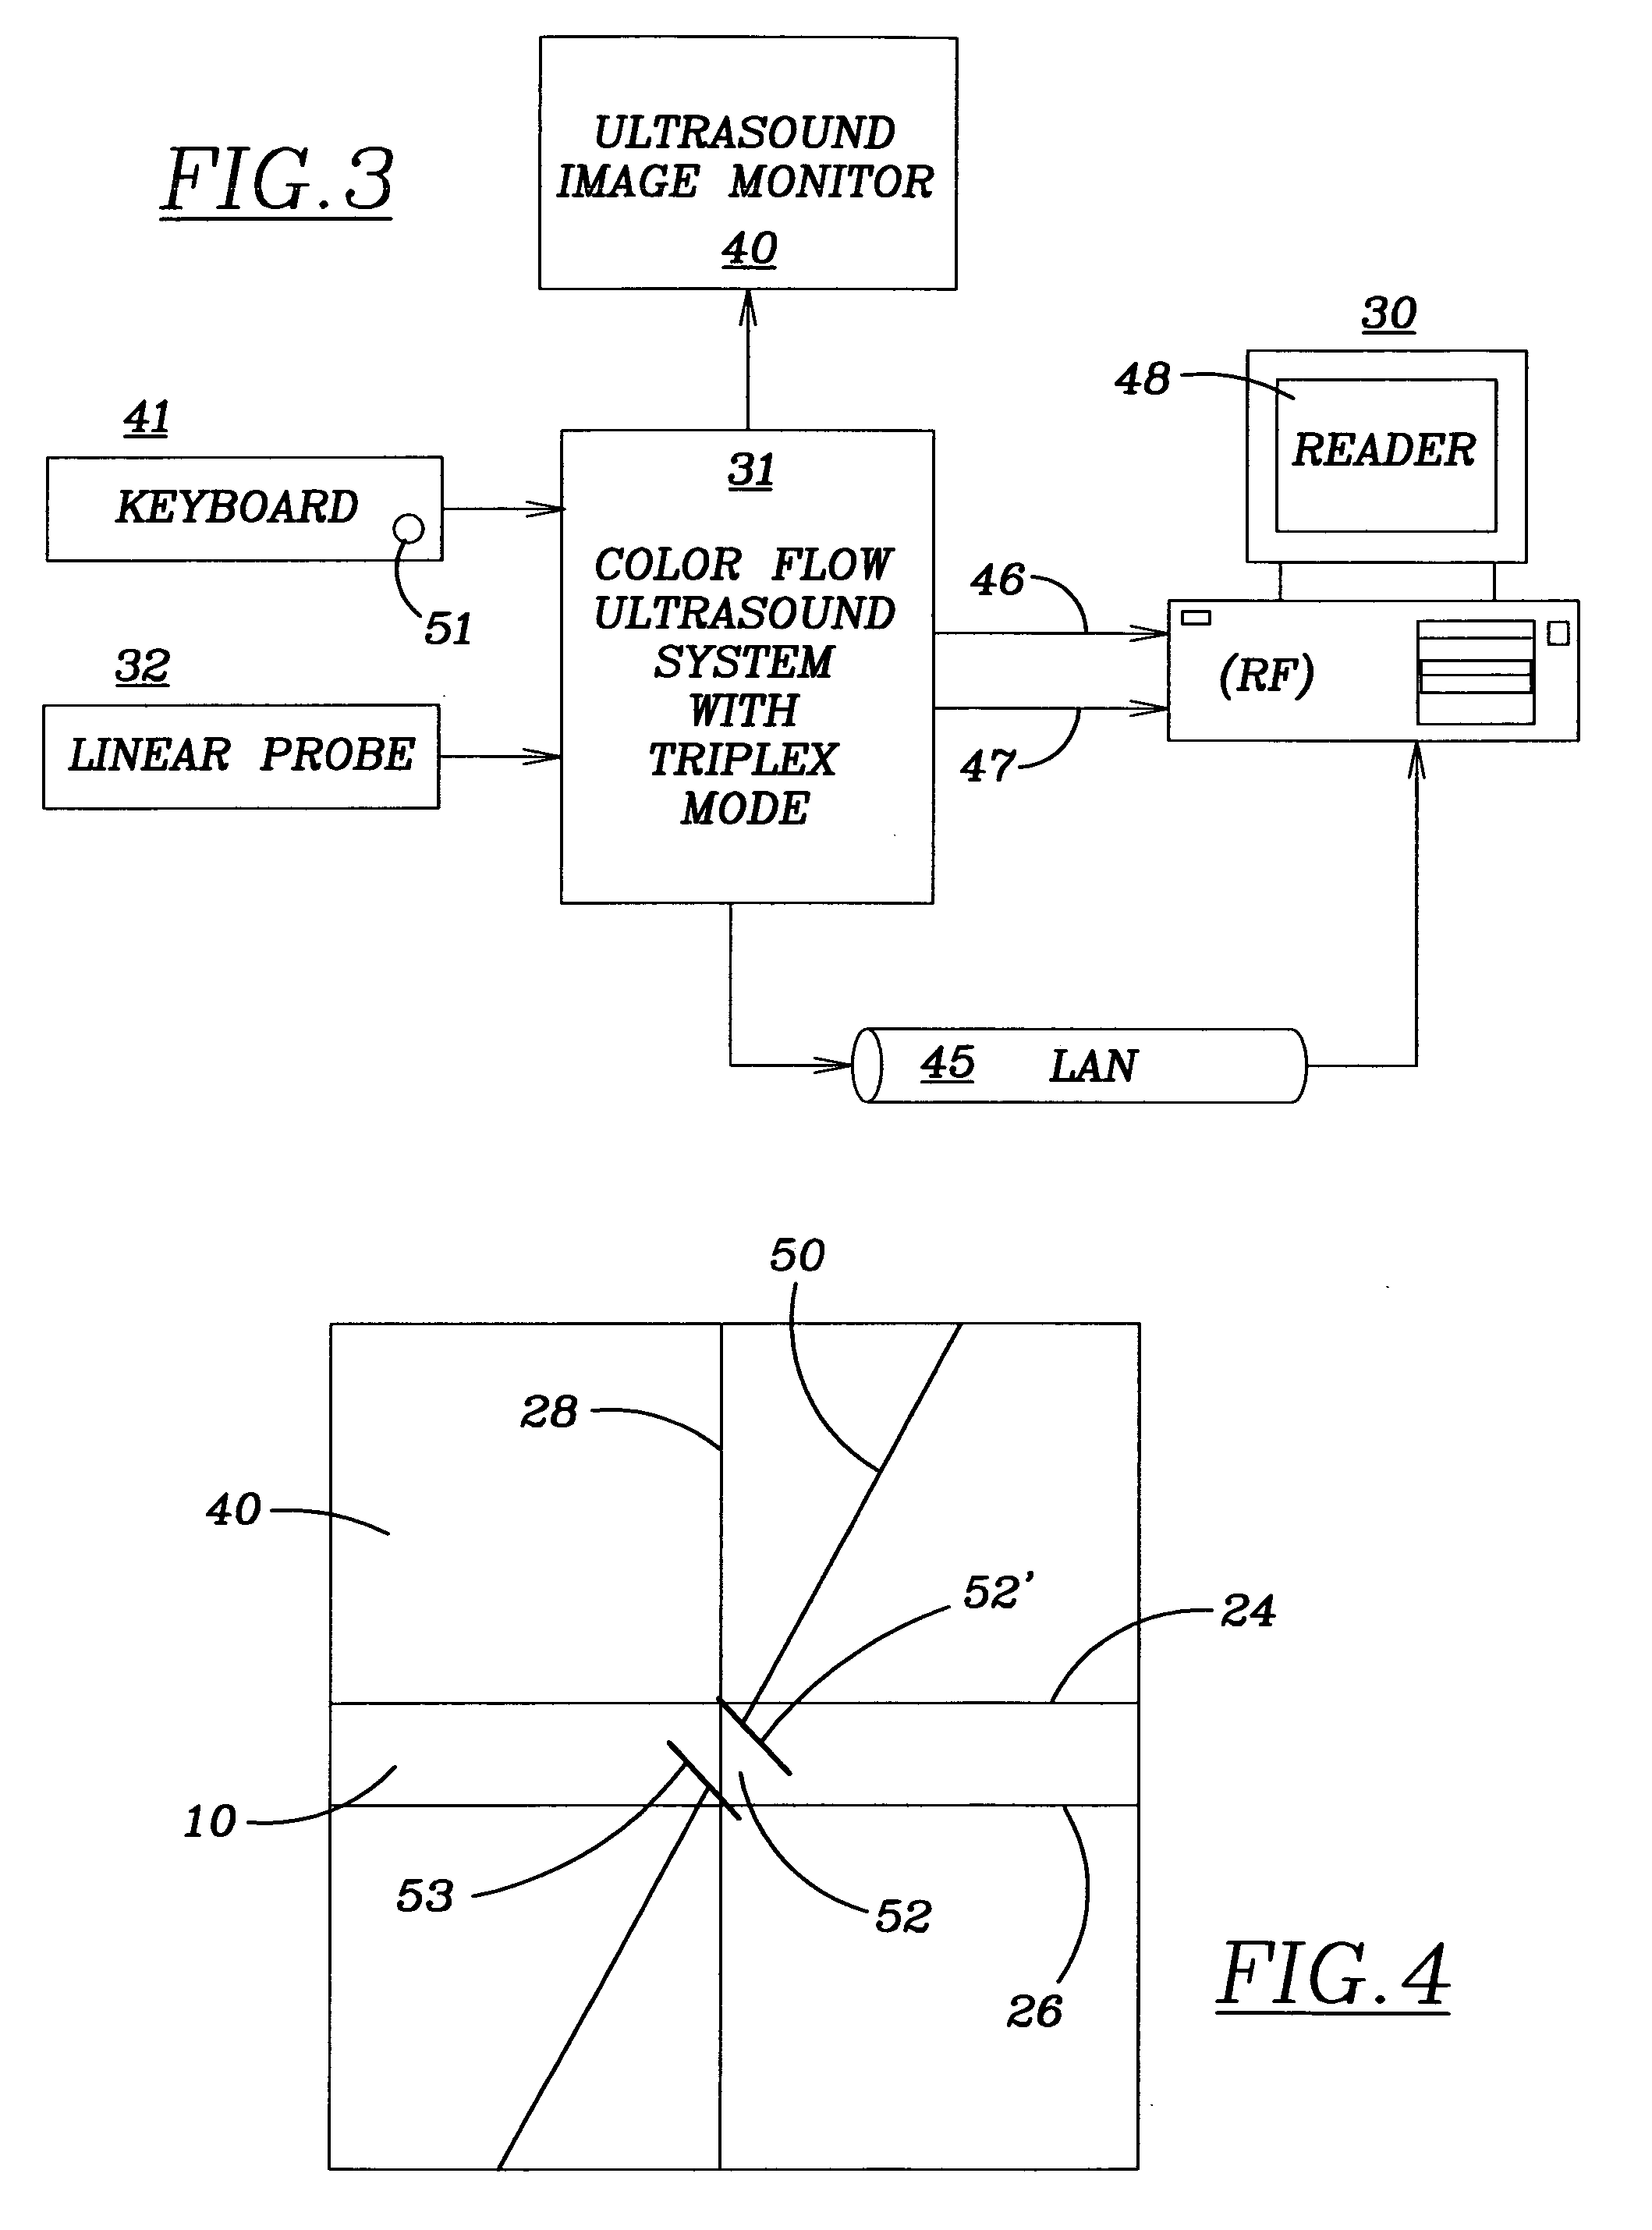 Method and diagnostic ultrasound apparatus for determining the condition of a person's artery or arteries